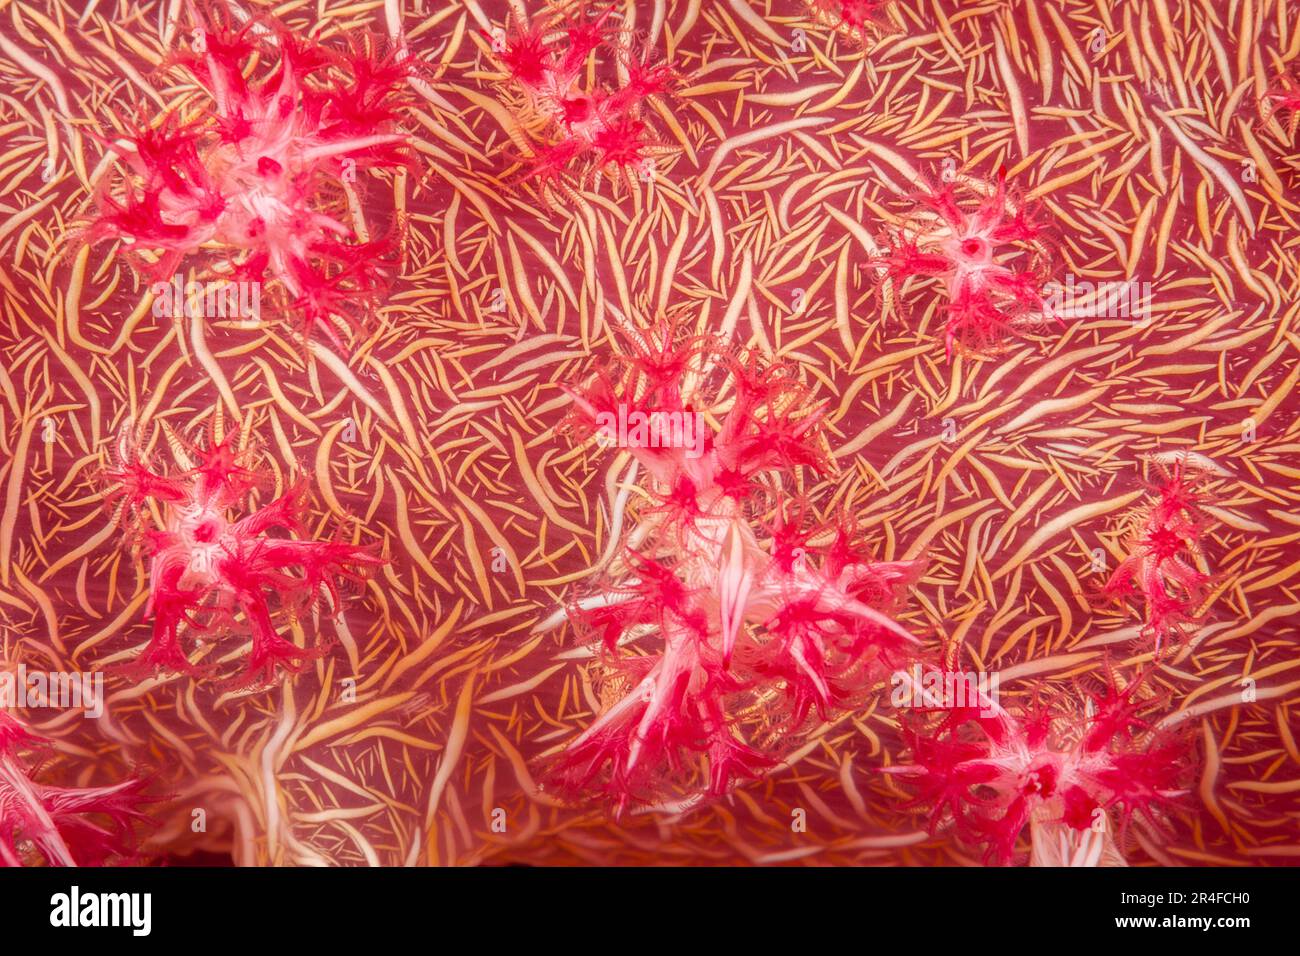 A night time close look at the feeding polyps on alcyonarian soft coral, Dendroephthya sp. The white lines are calcium spicules on the surface of the Stock Photo